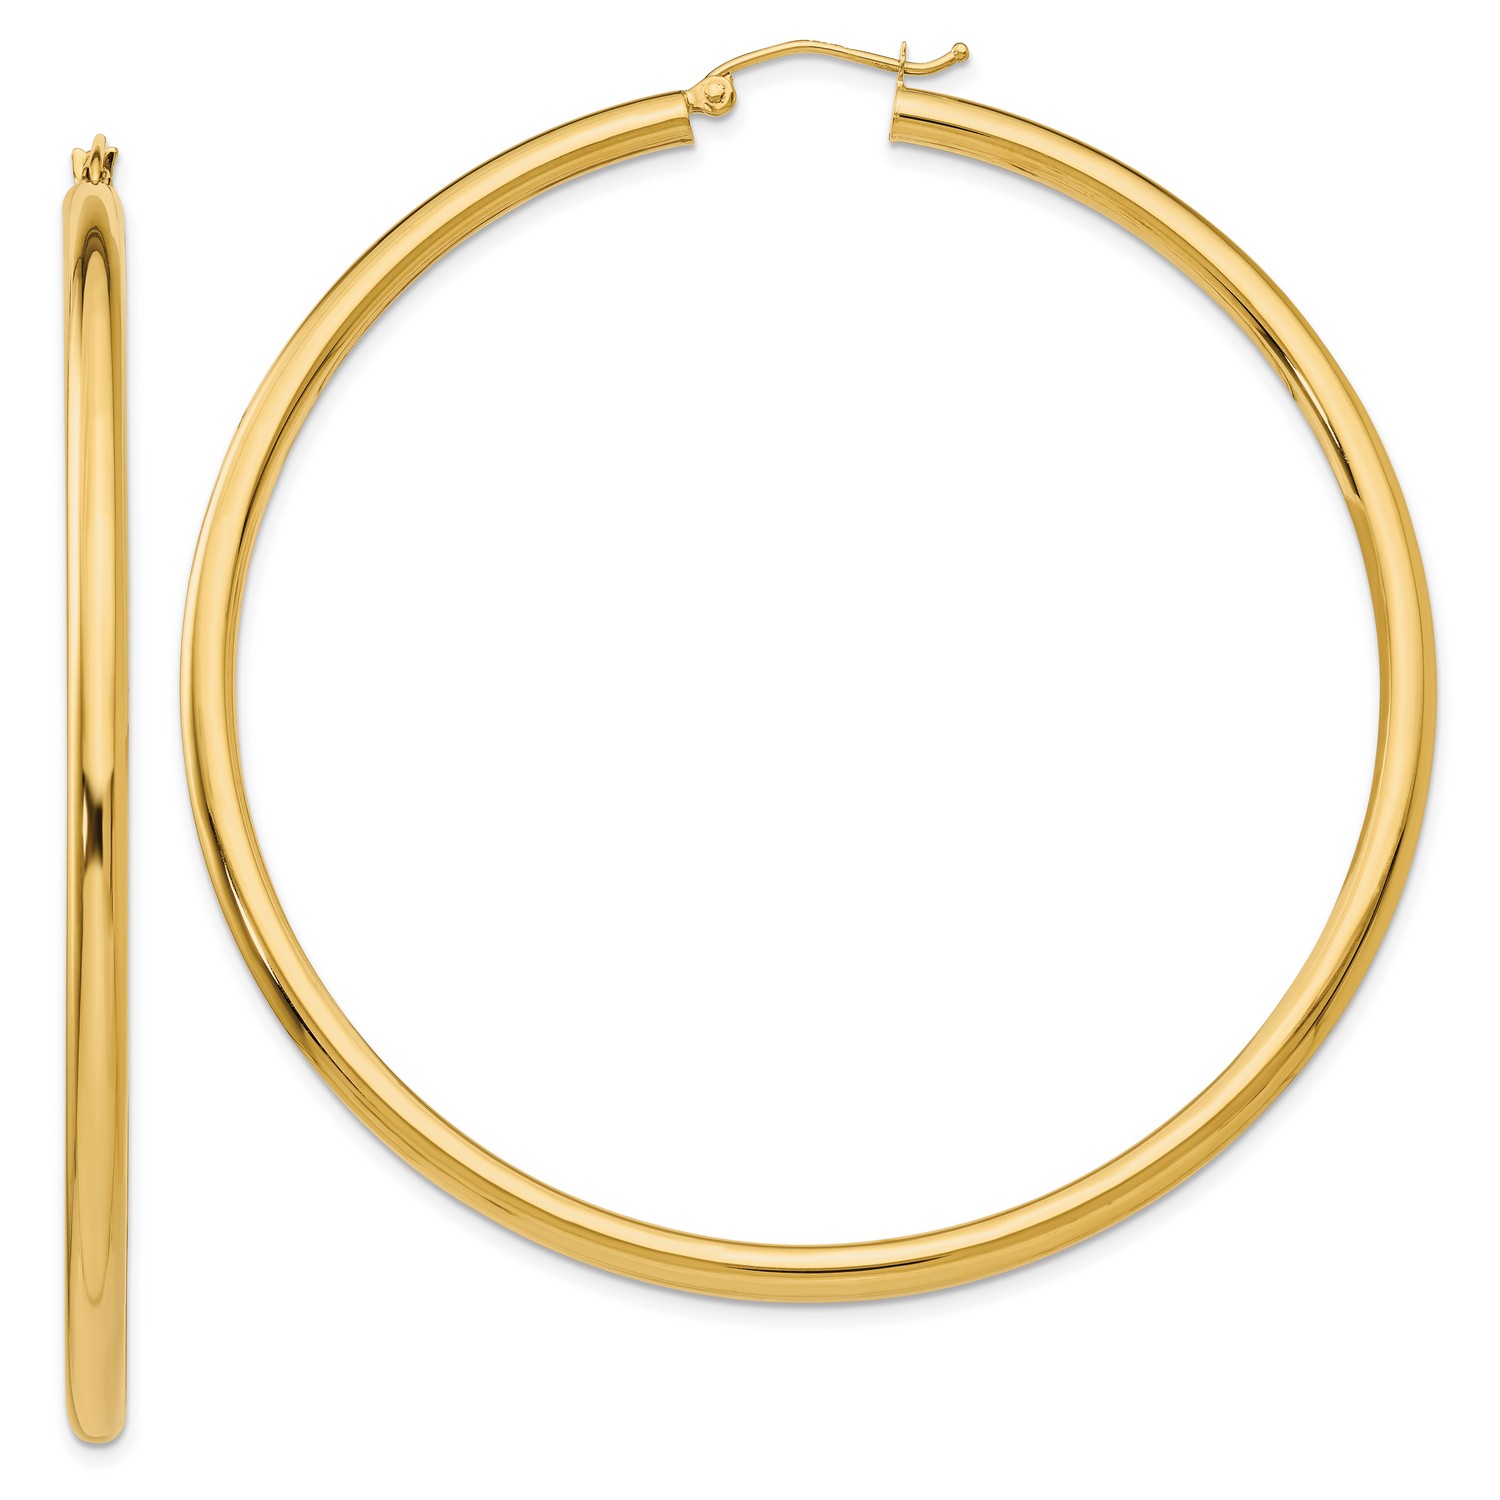 Pre-owned Jewelry Stores Network 3mm Classic Lightweight Hoop Earrings In Real 14k Yellow Gold 65 Mm